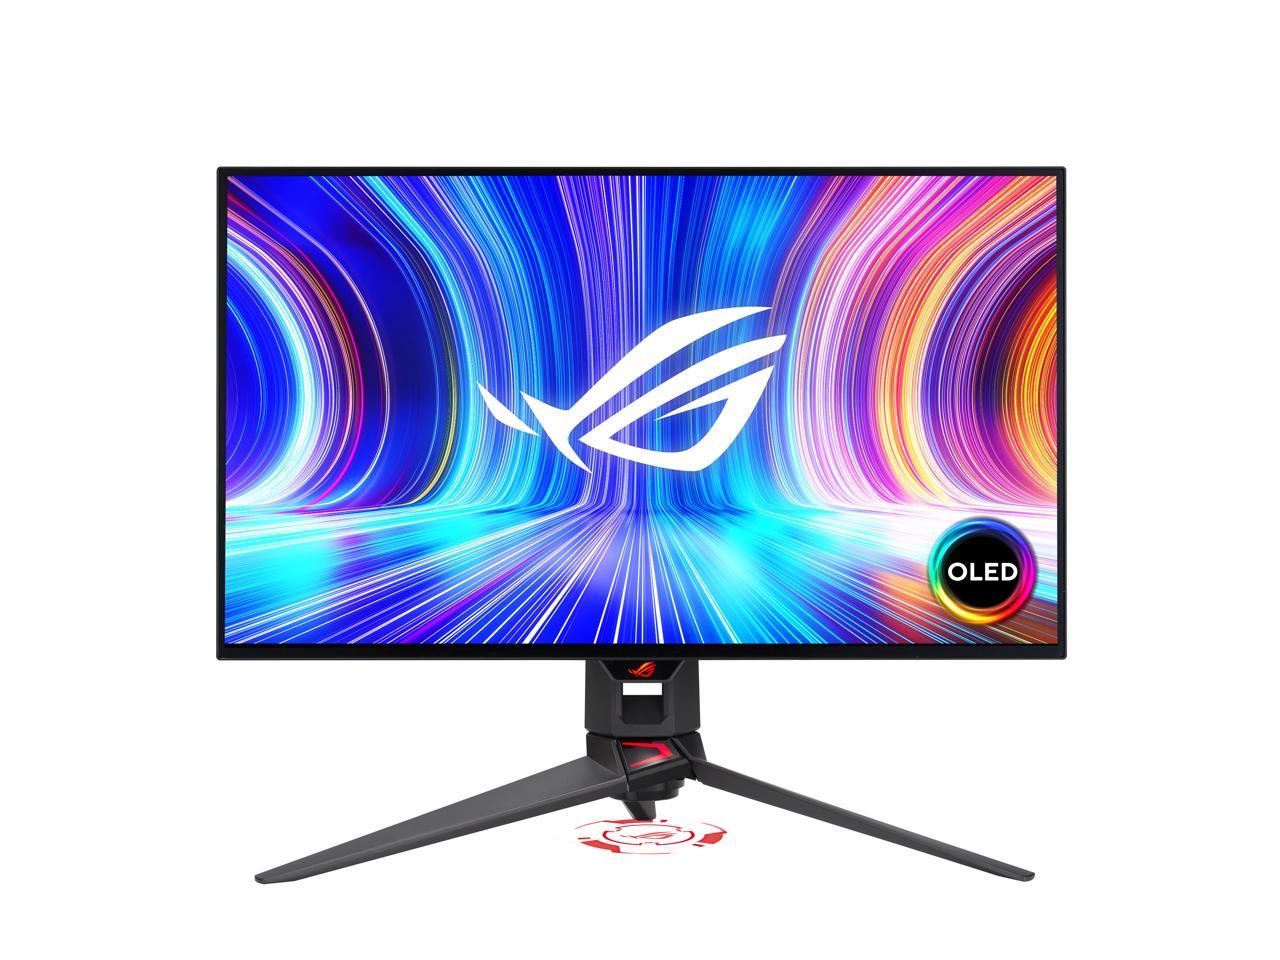 ASUS Republic of Gamers Swift OLED 26.5 1440p HDR 240 Hz Gaming Monitor